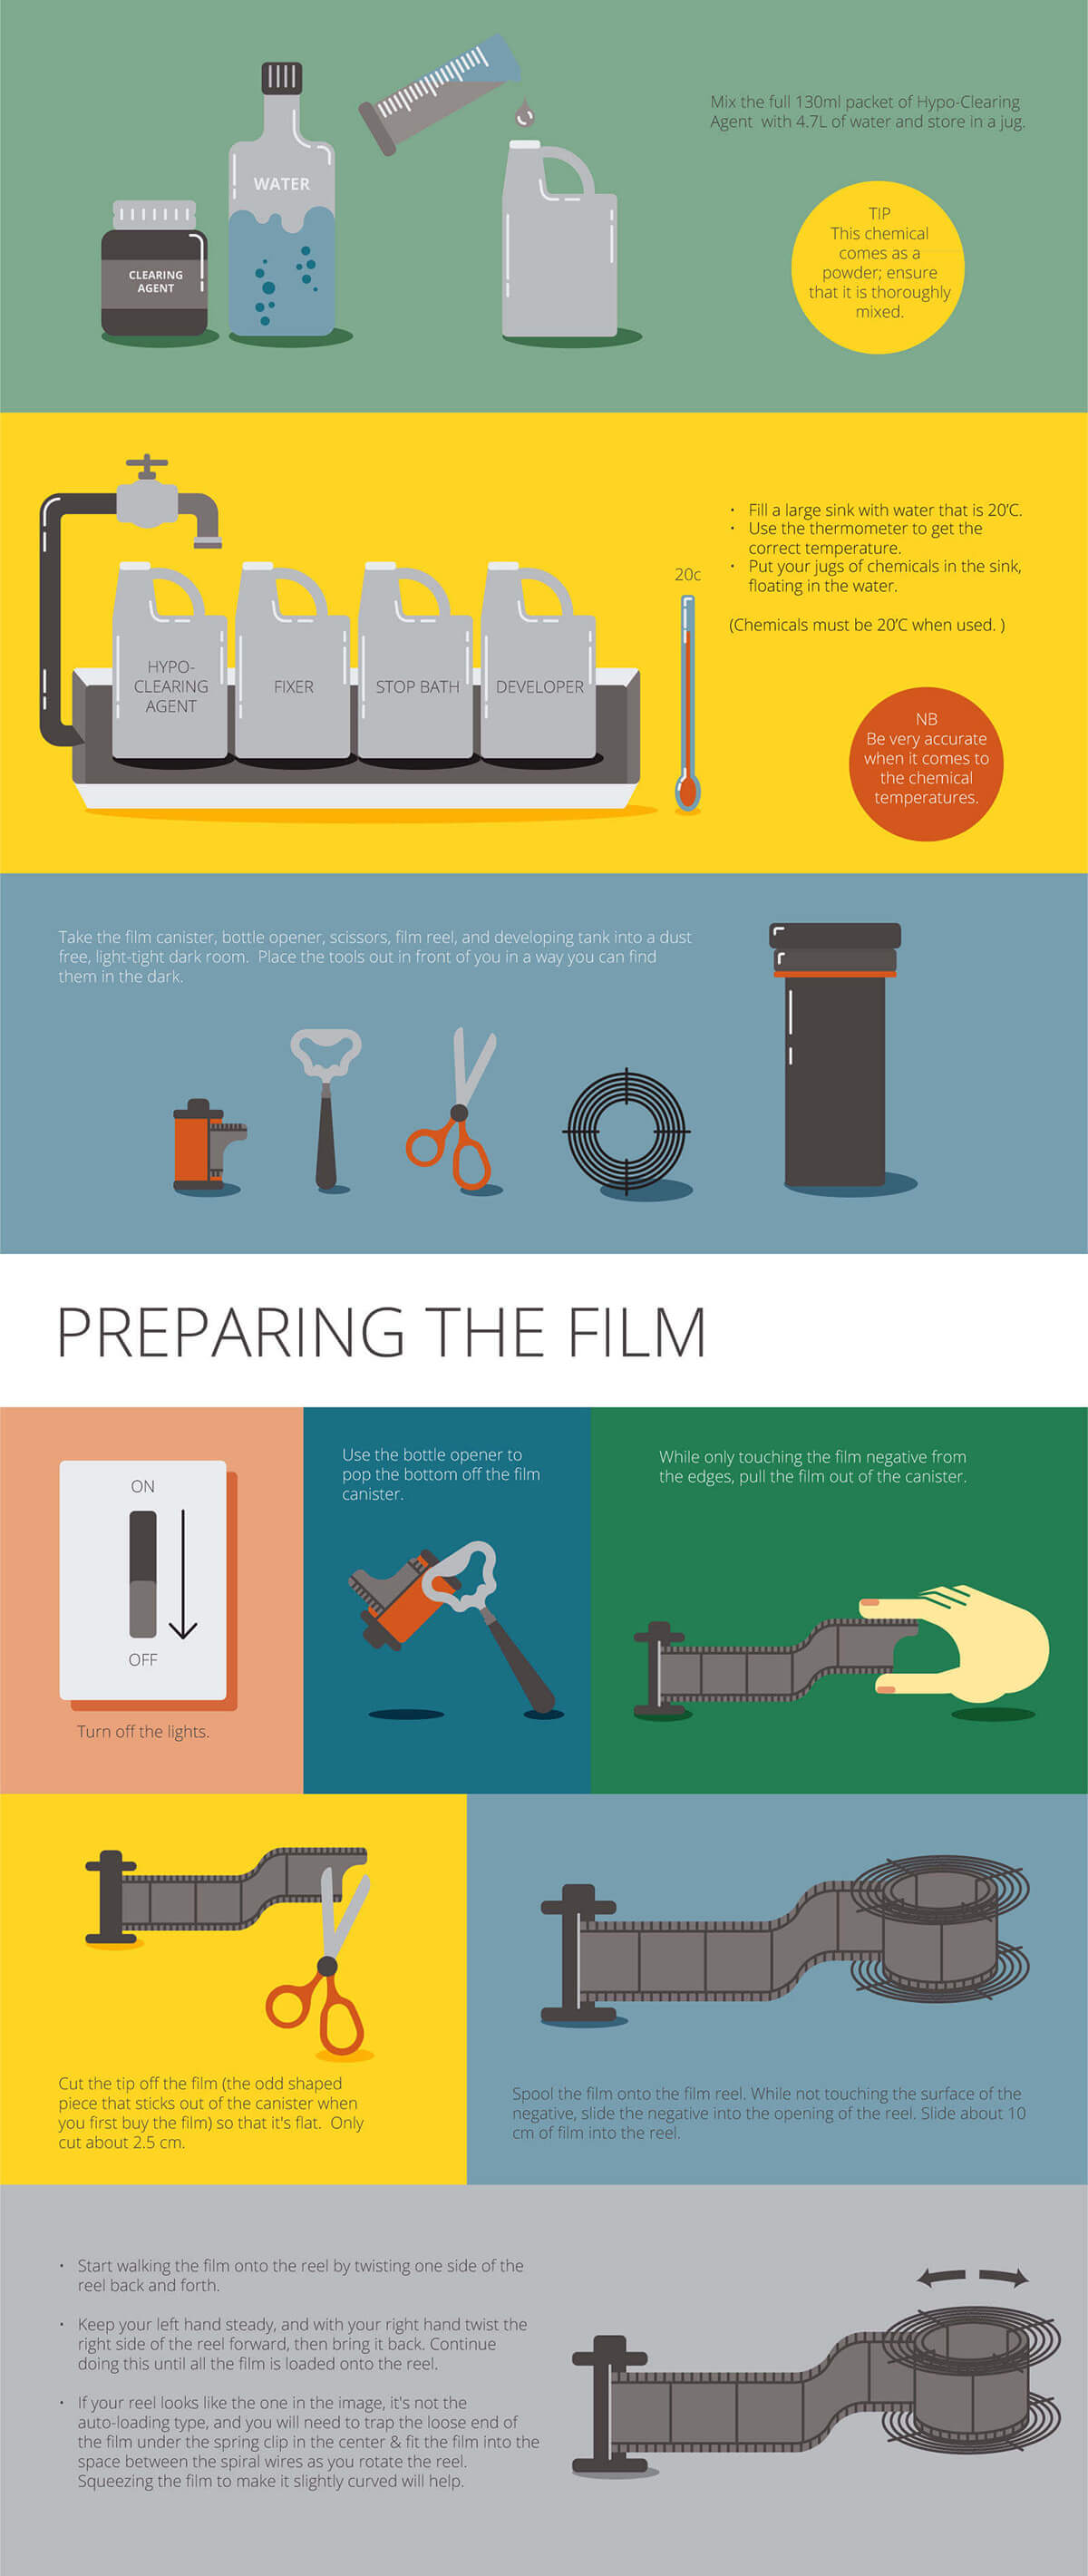 How to Develop Film